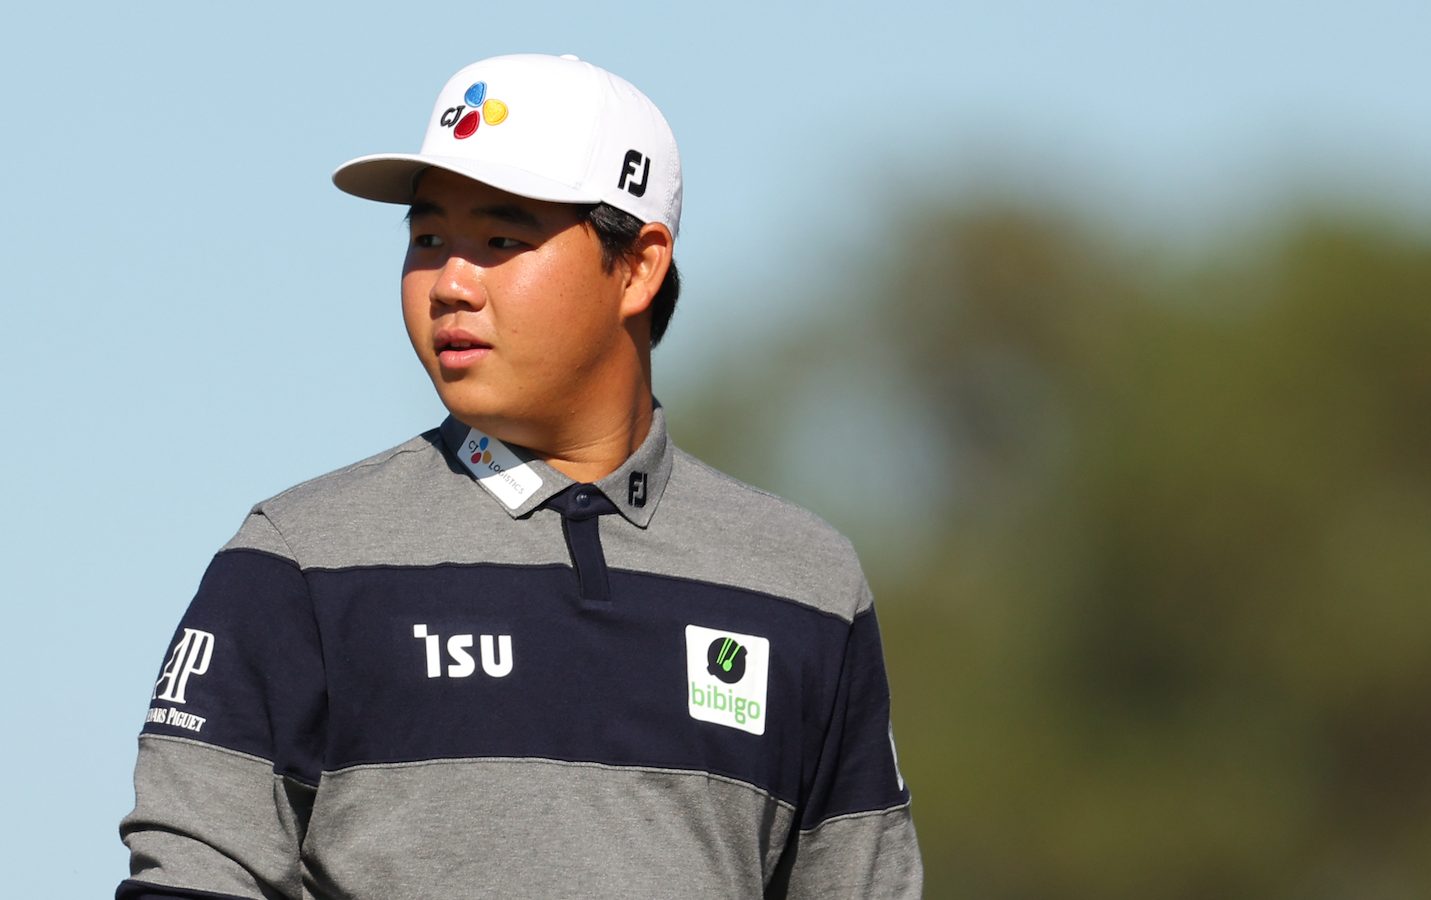 Tom Kim in running for Shriners win on PGA Tour, tied with Cantlay for lead